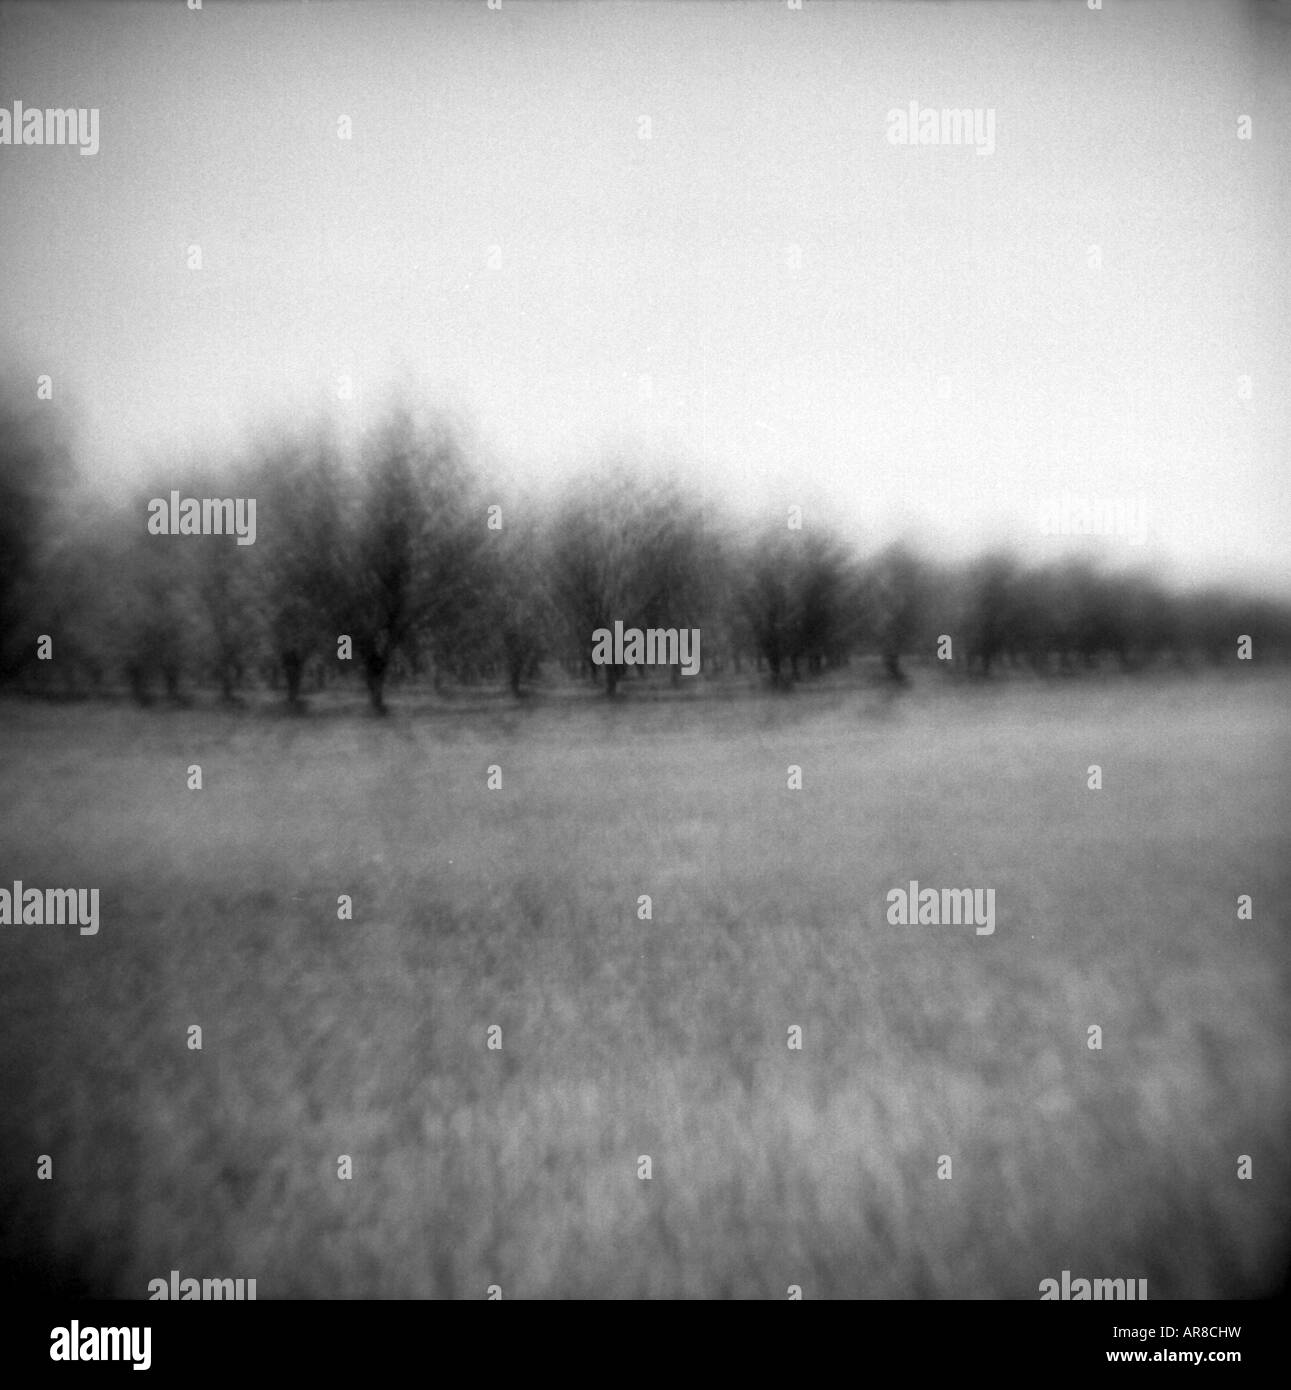 toy camera blurry trees orchard line field abstract bw black and white pecan orchard nature evocative dreamlike zen Stock Photo